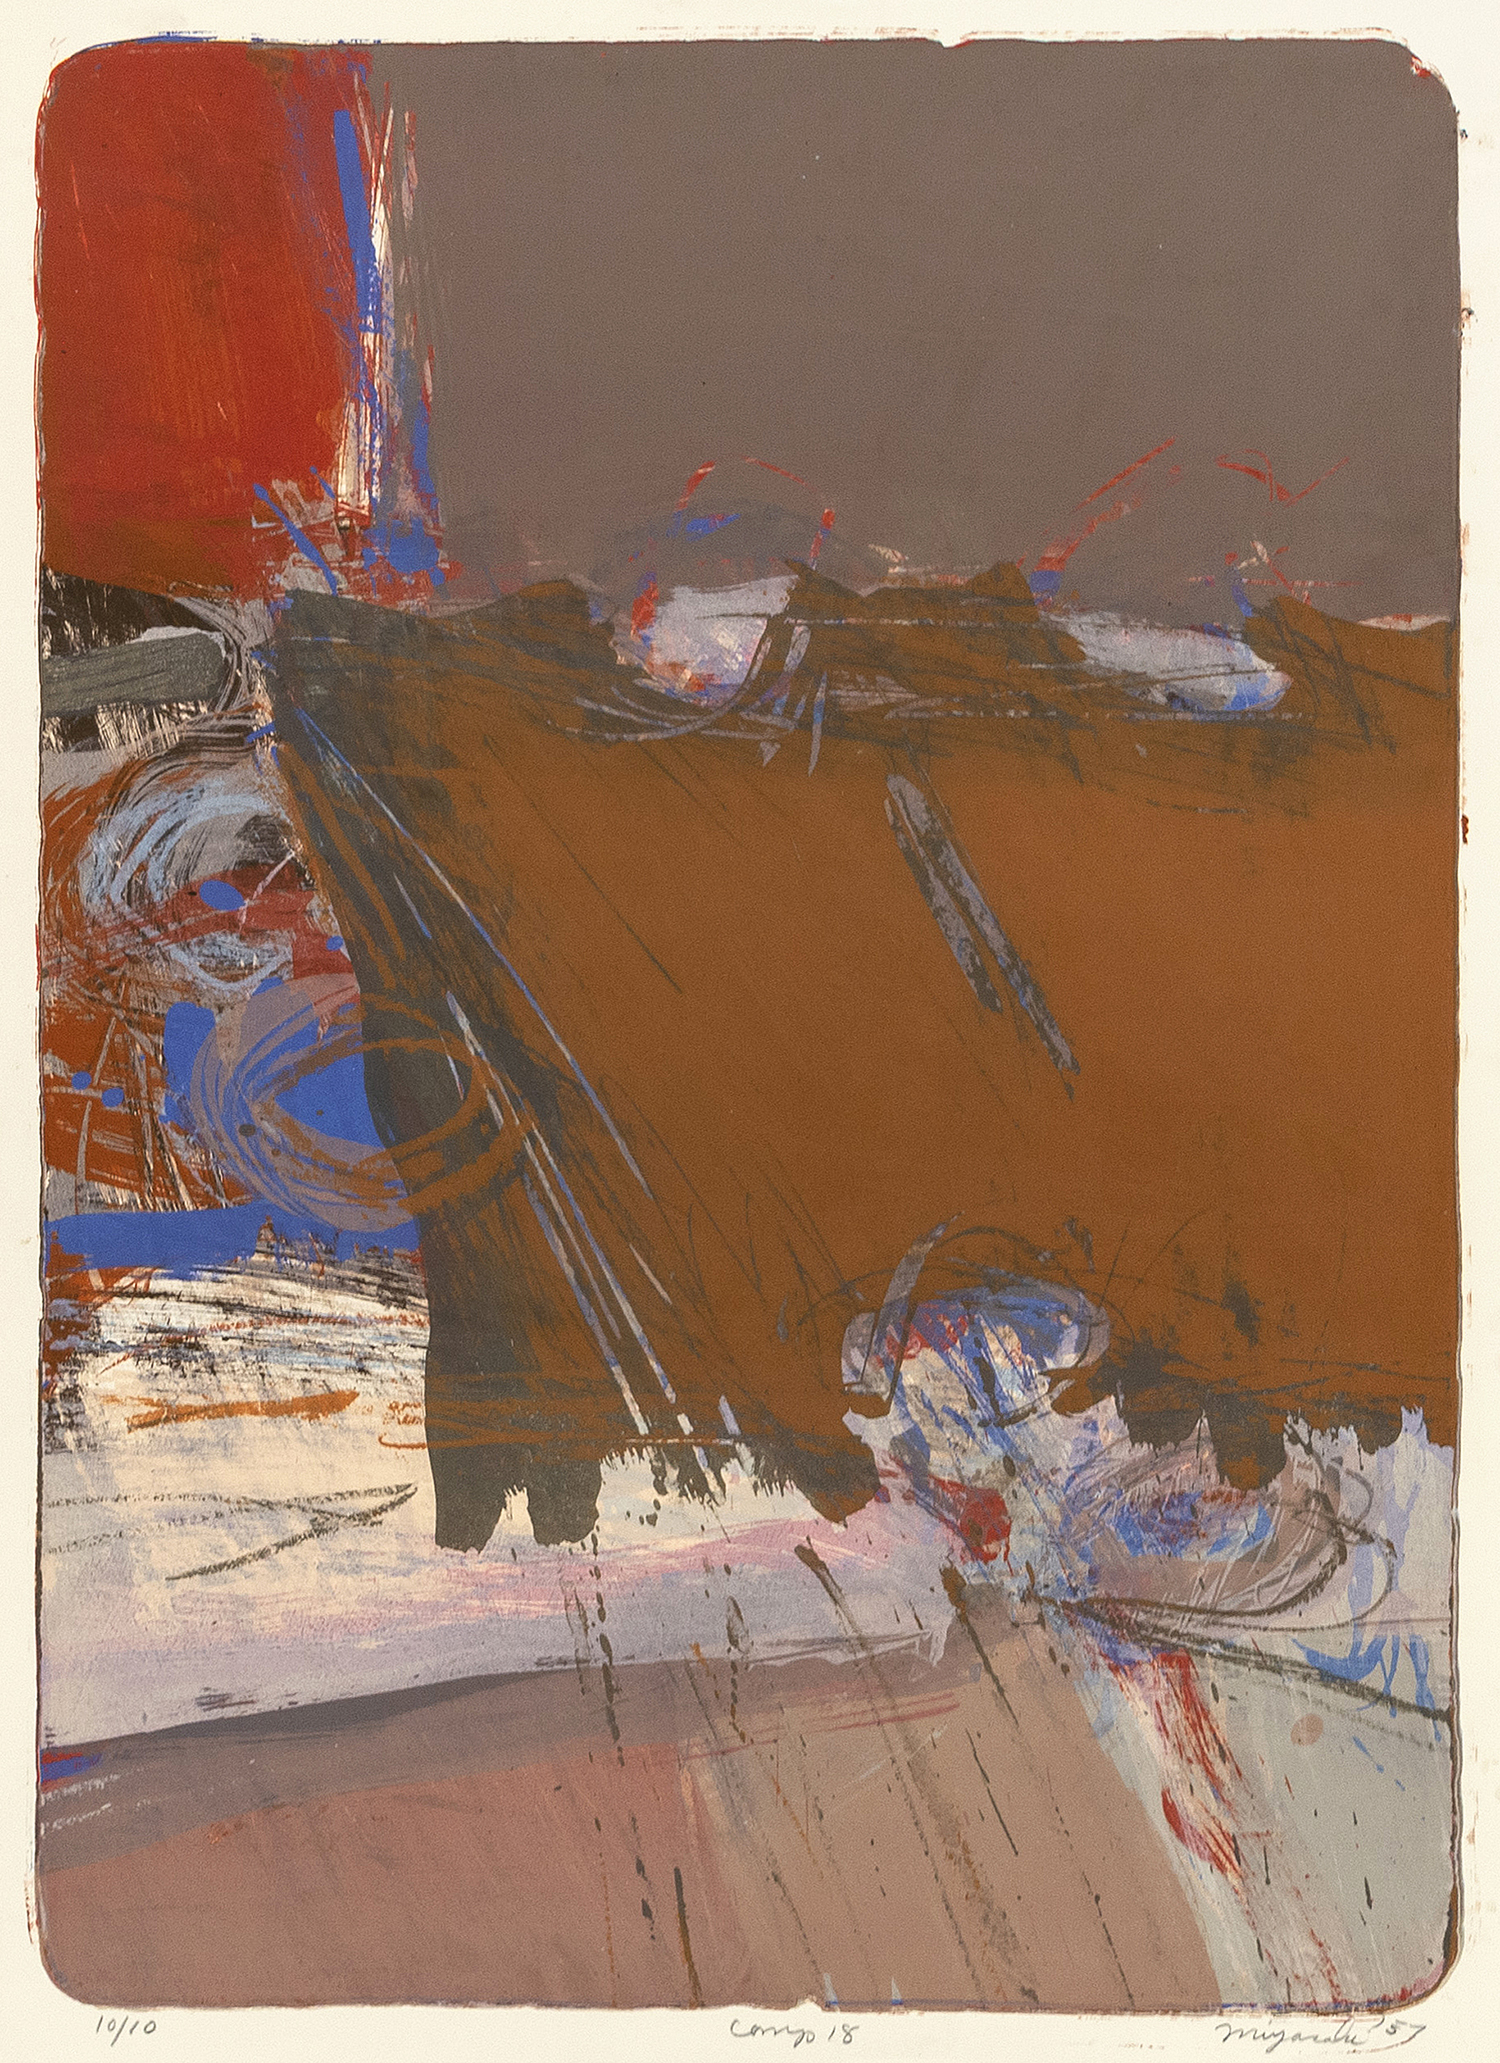 Comp 18, 1957, Lithograph, 23 1/2 x 17 1/4 inches (59.7 x 43.8 cm), Edition of 10